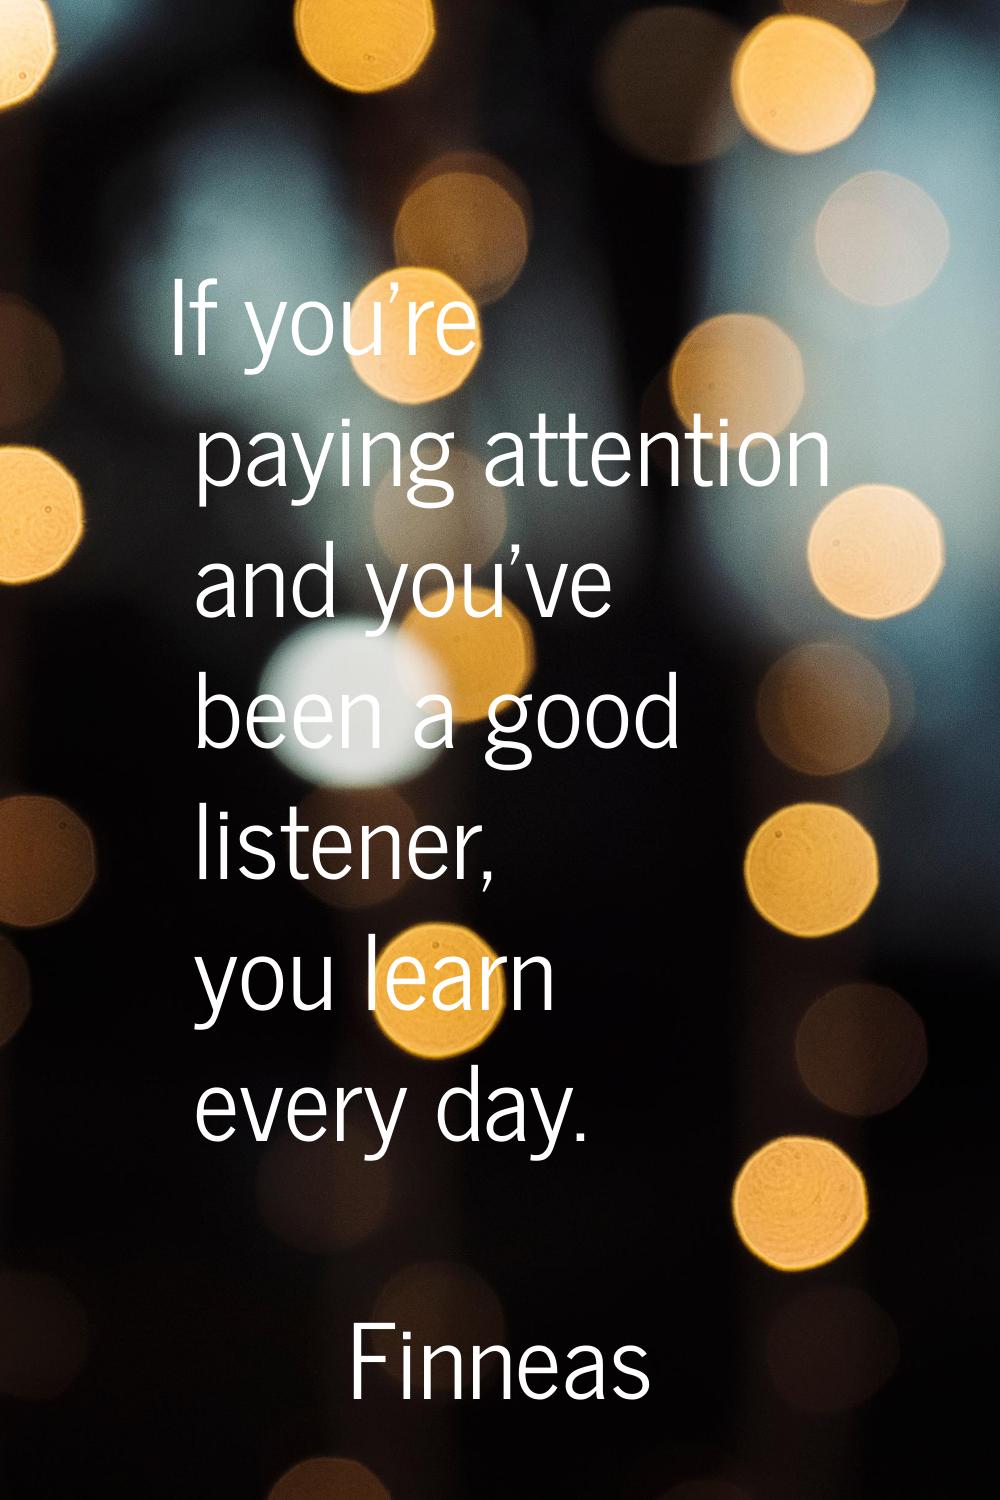 If you're paying attention and you've been a good listener, you learn every day.